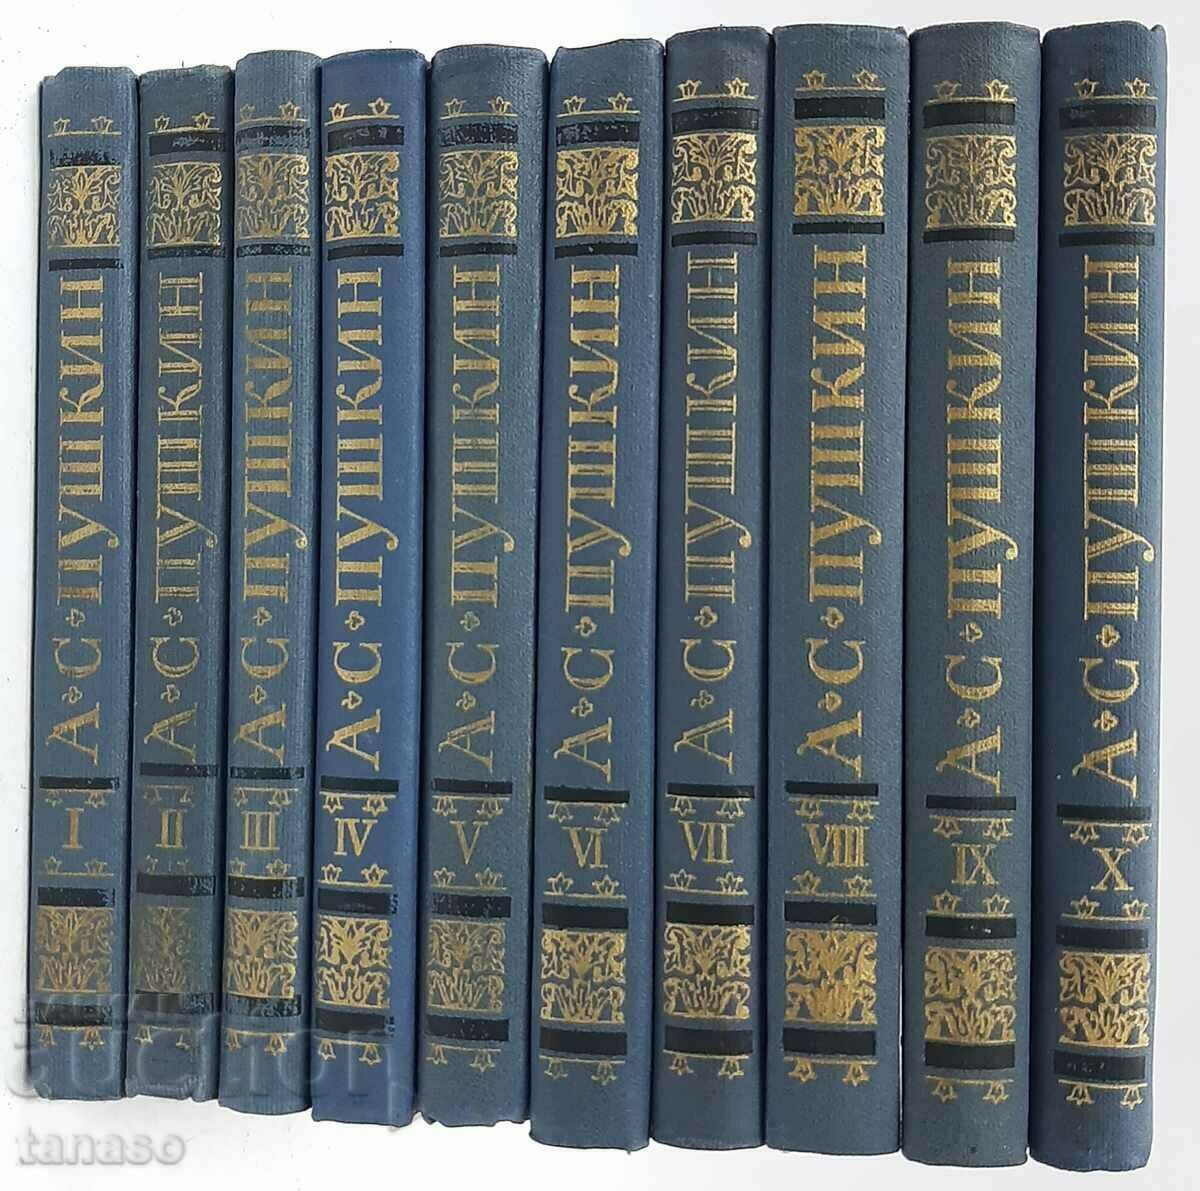 A collection of works in ten volumes. A.S. Pushkin. Volume 1-10